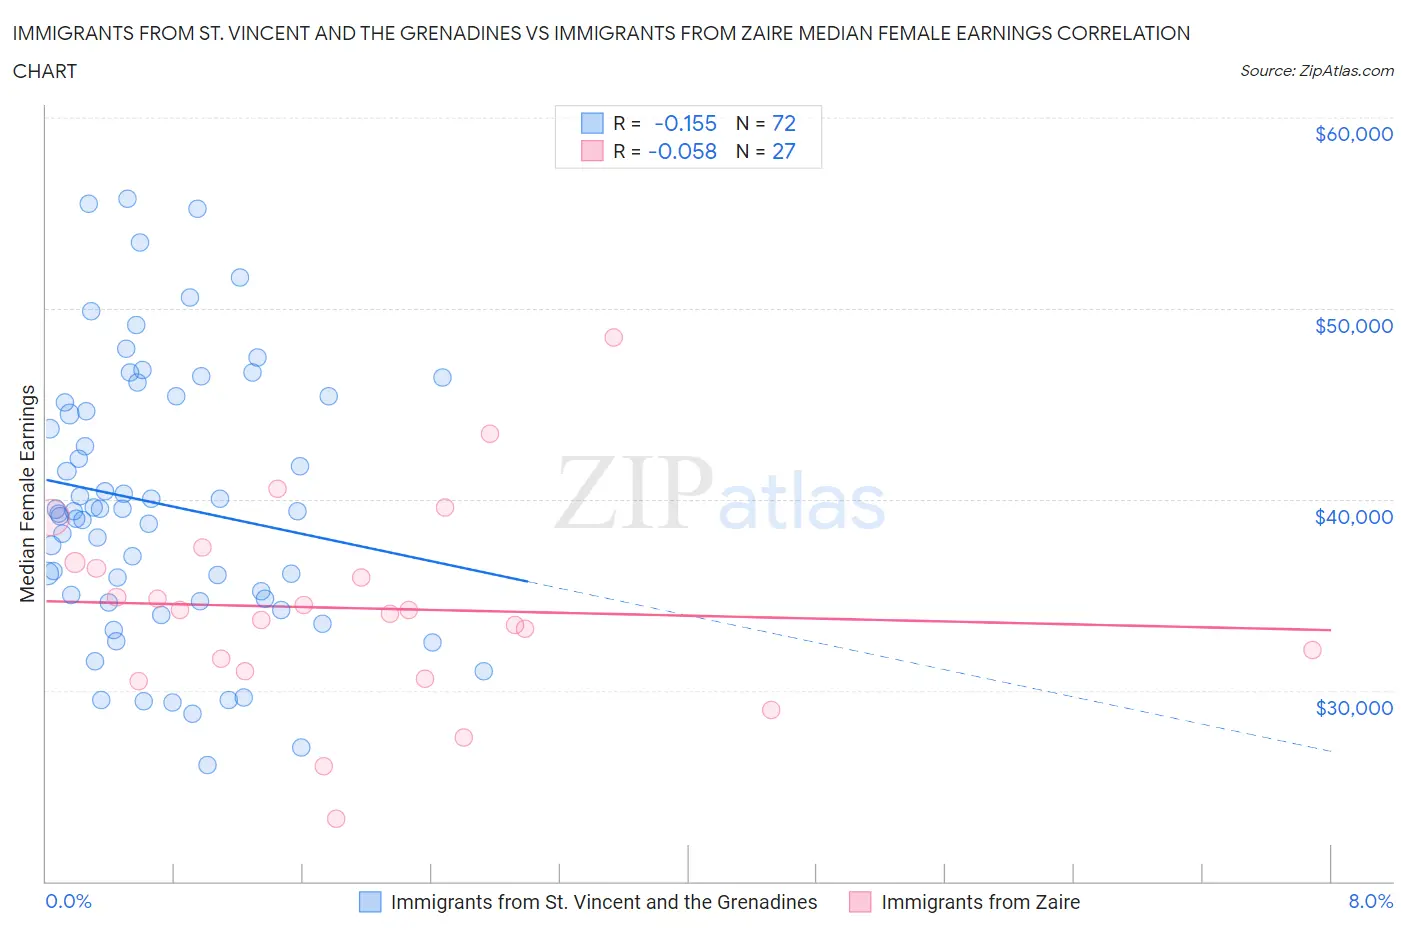 Immigrants from St. Vincent and the Grenadines vs Immigrants from Zaire Median Female Earnings